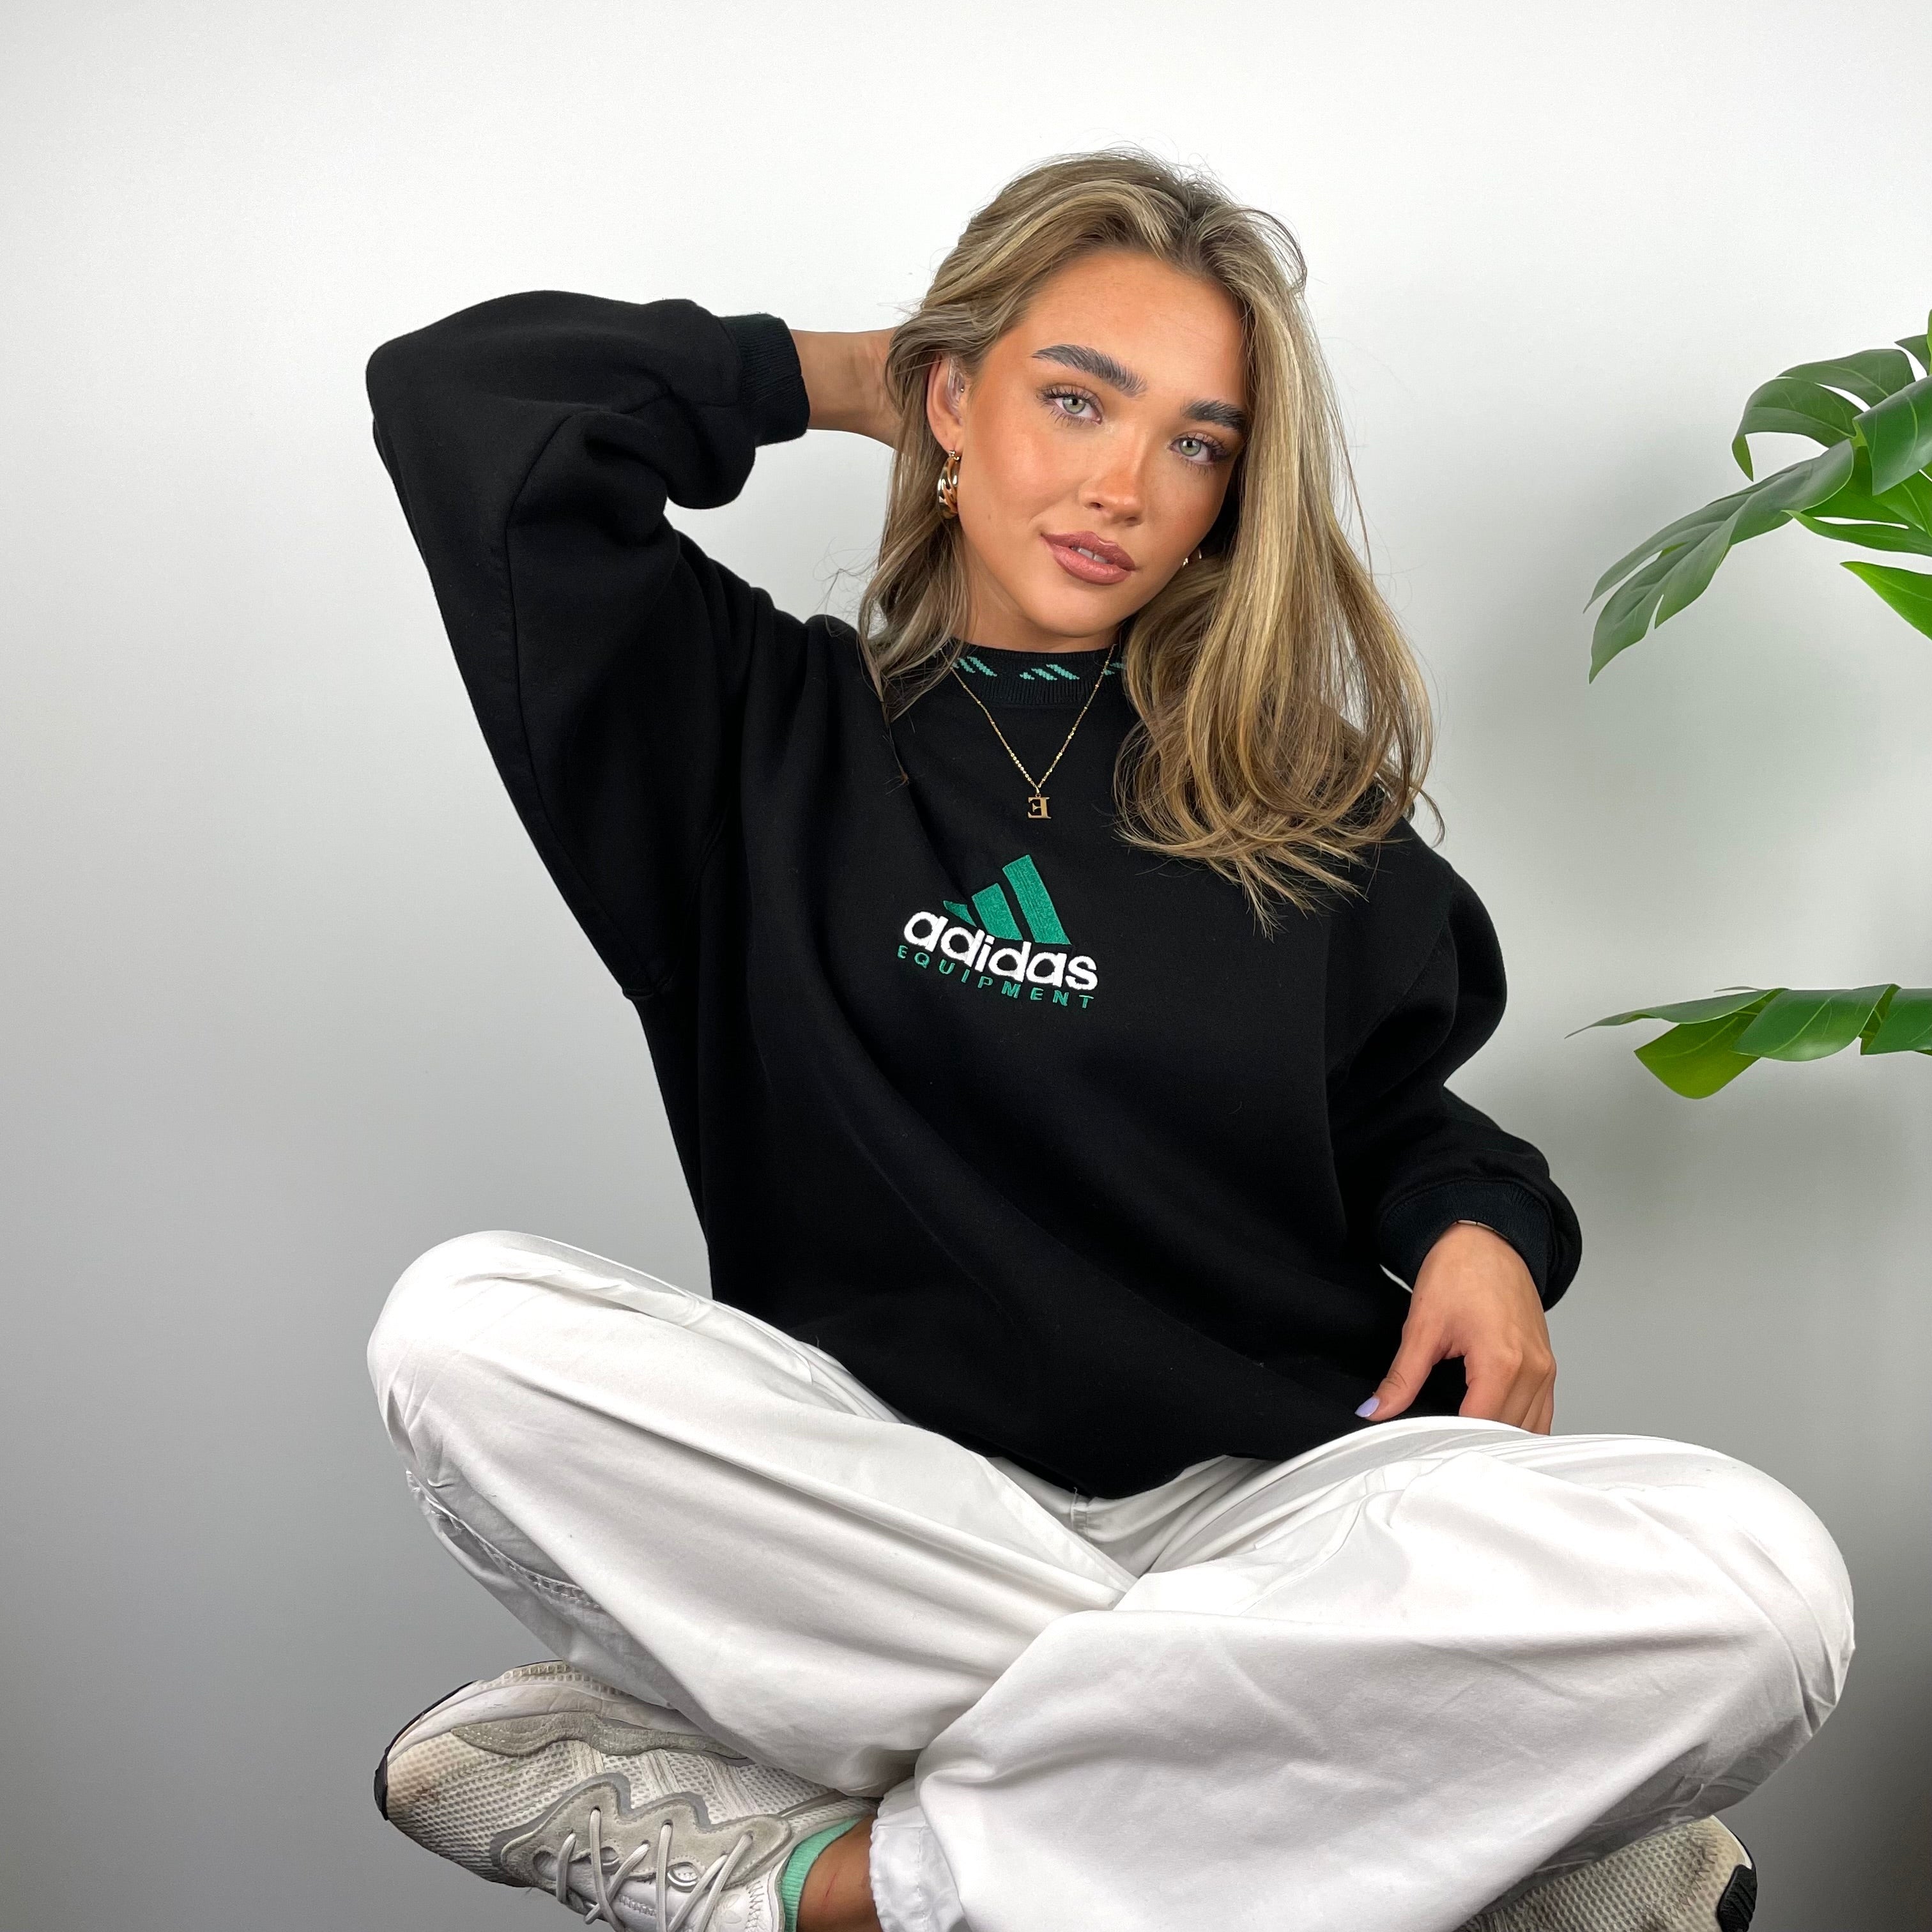 Adidas Equipment RARE Black Embroidered Spell Out Sweatshirt (L)